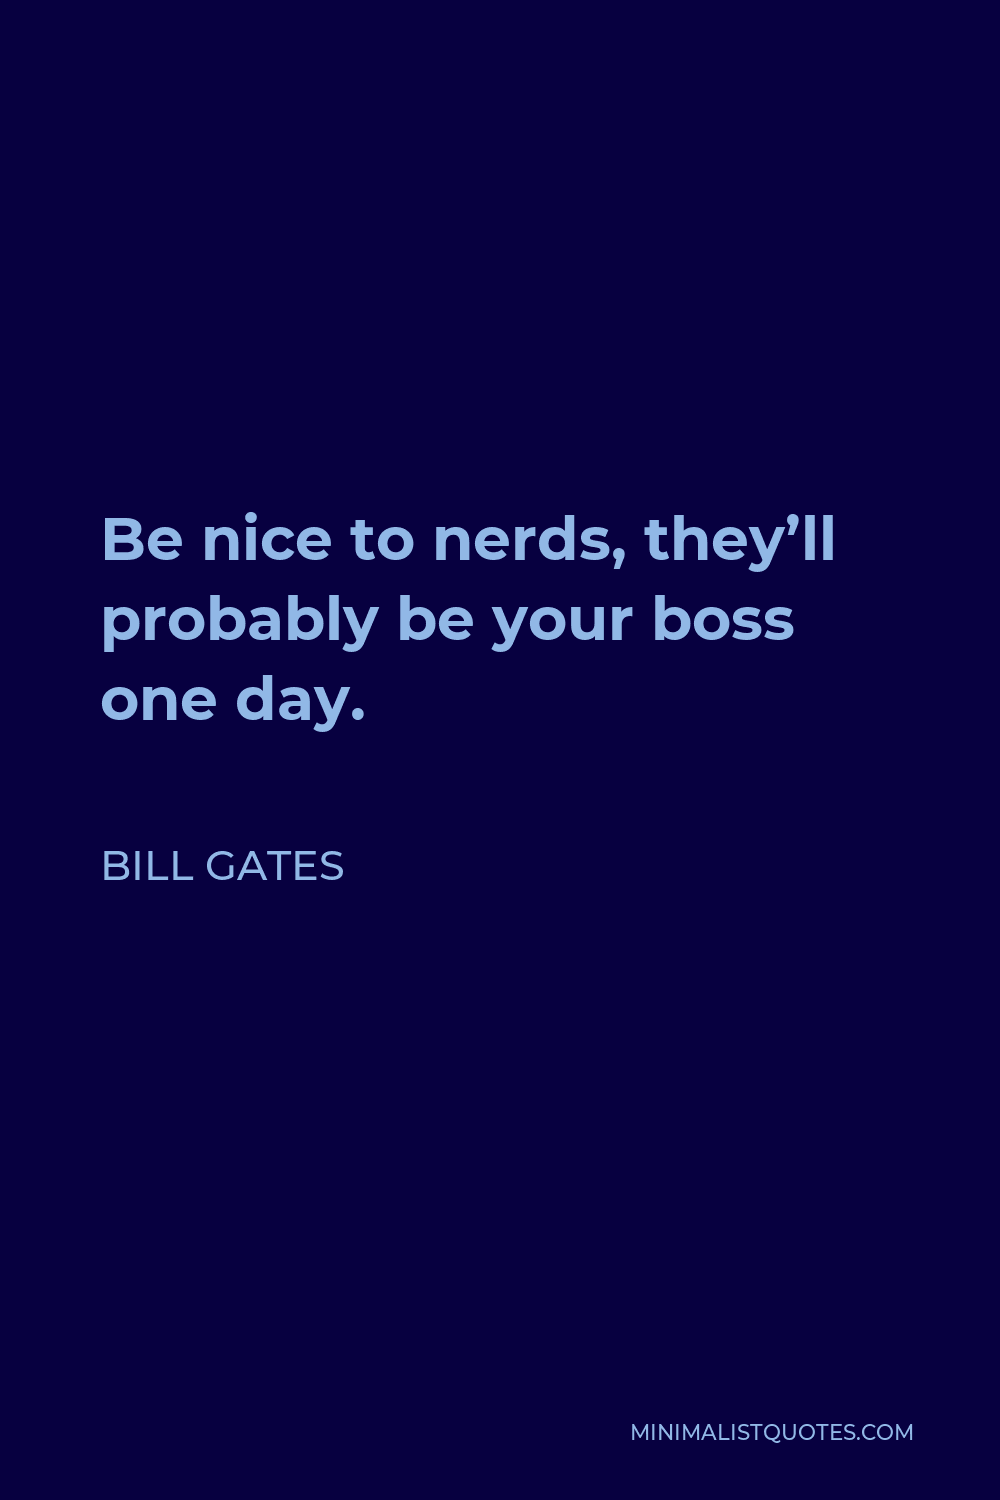 Bill Gates Quote - Be nice to nerds, they’ll probably be your boss one day.